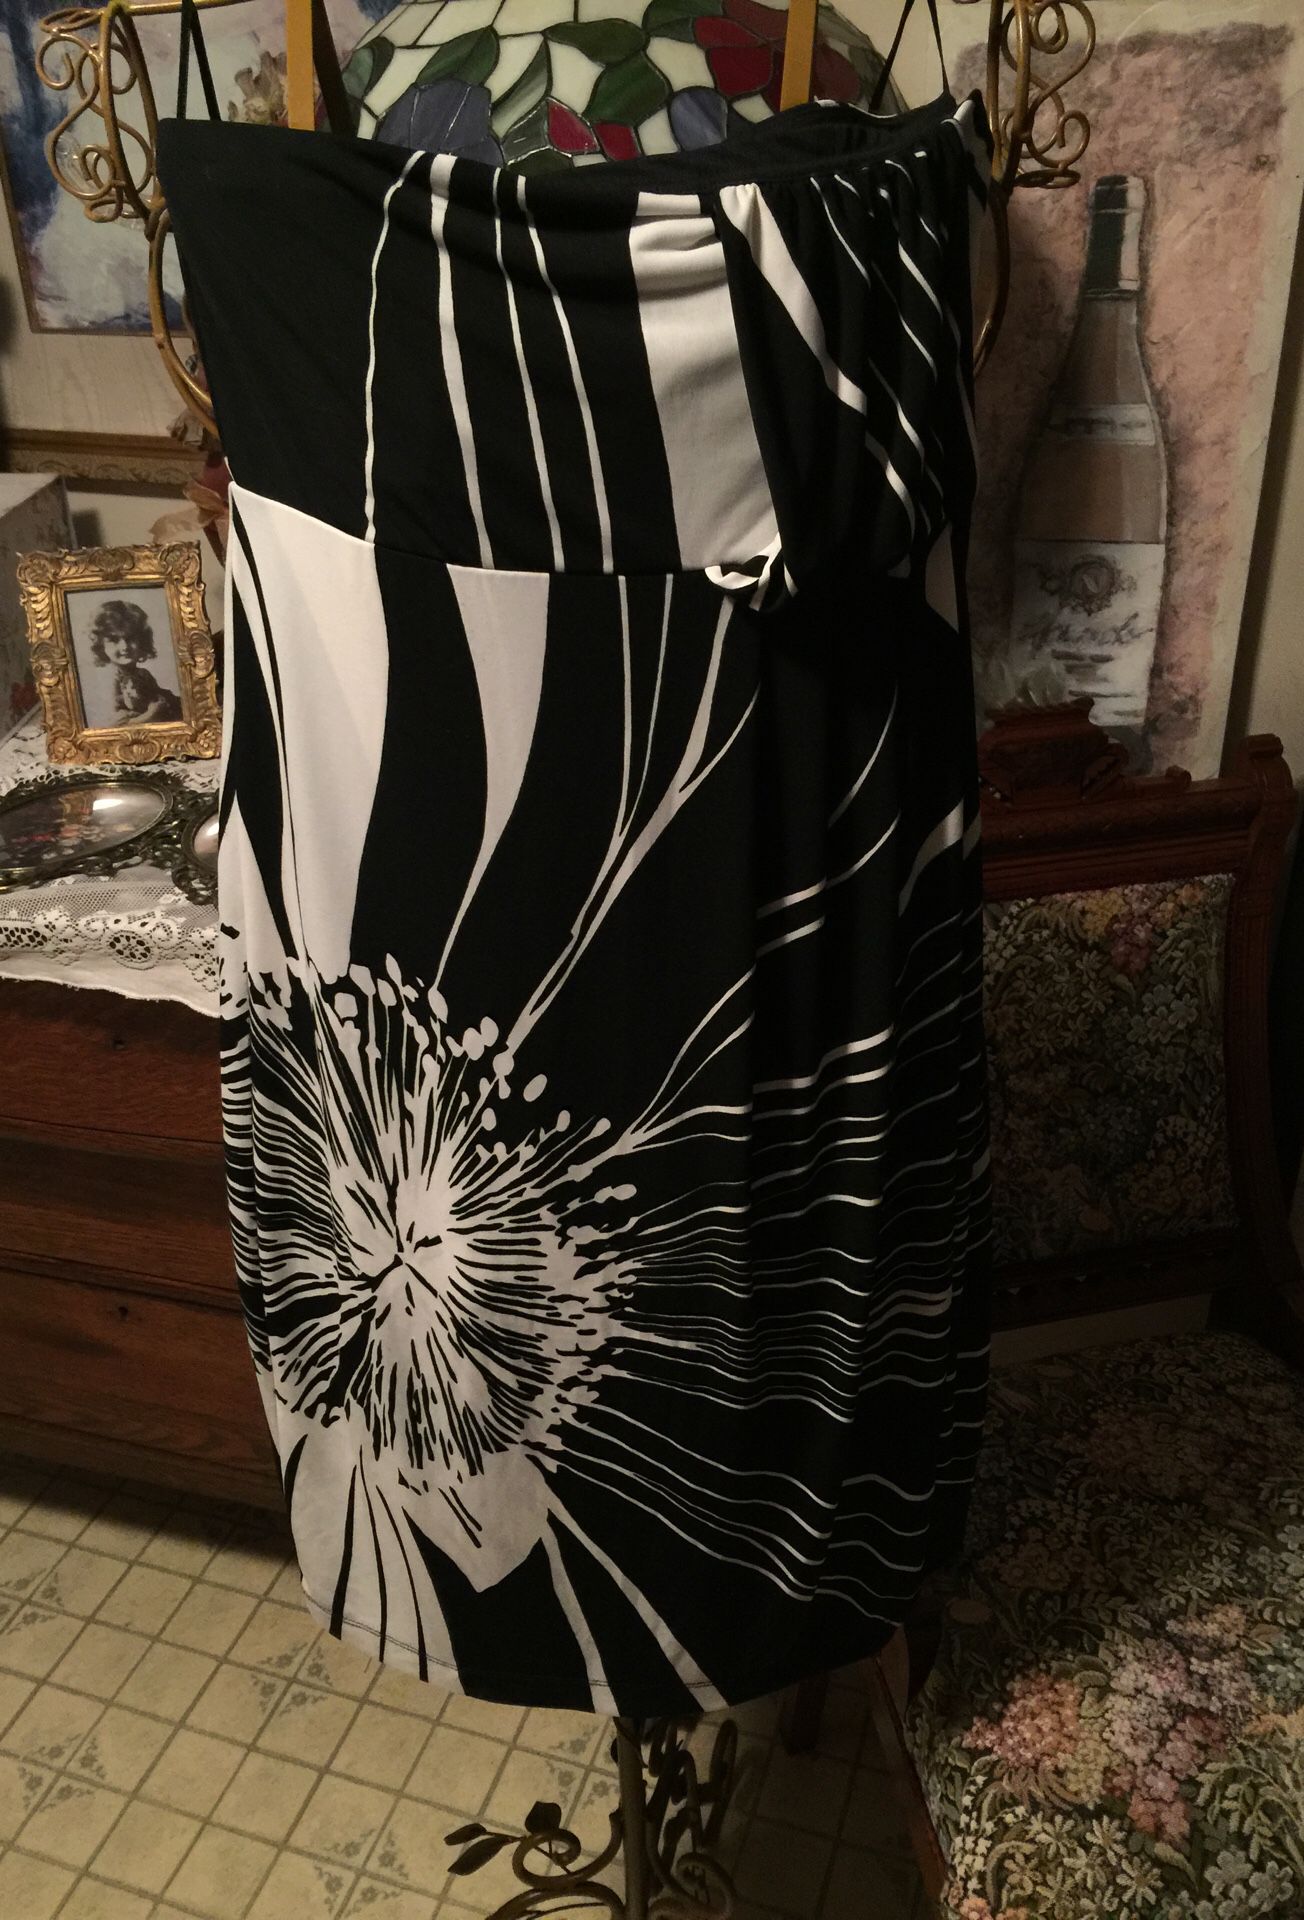 Misses summer stretch strapless eve club date dress black & white pattern island print Euc non smoke from the limited brand size small slip on